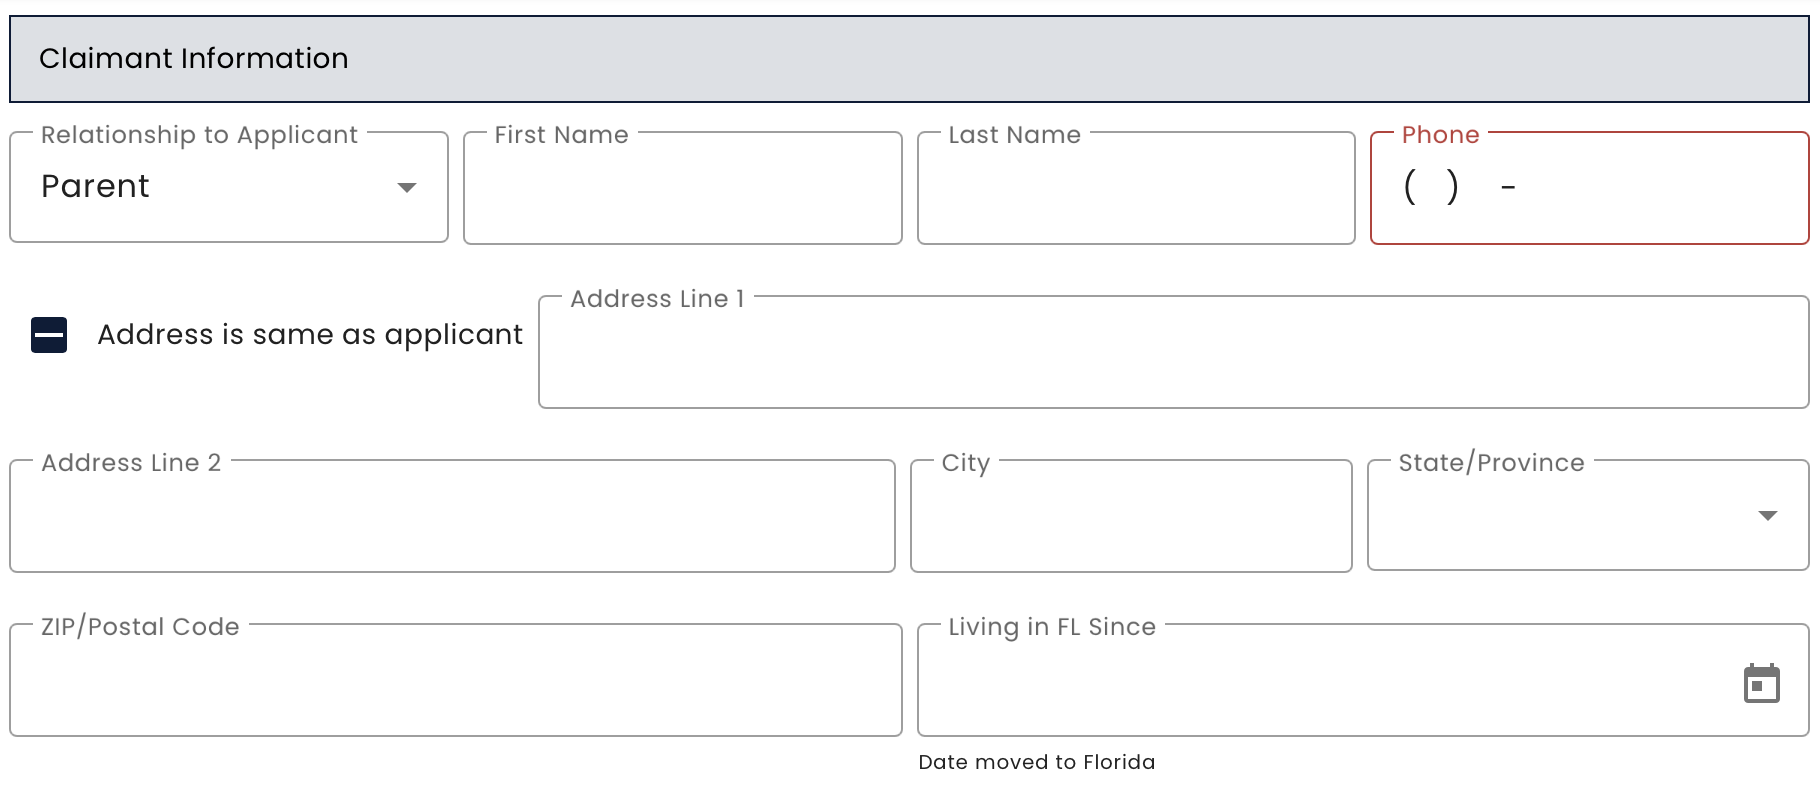 Screenshot of form collecting claimant information including relationship, name, and address